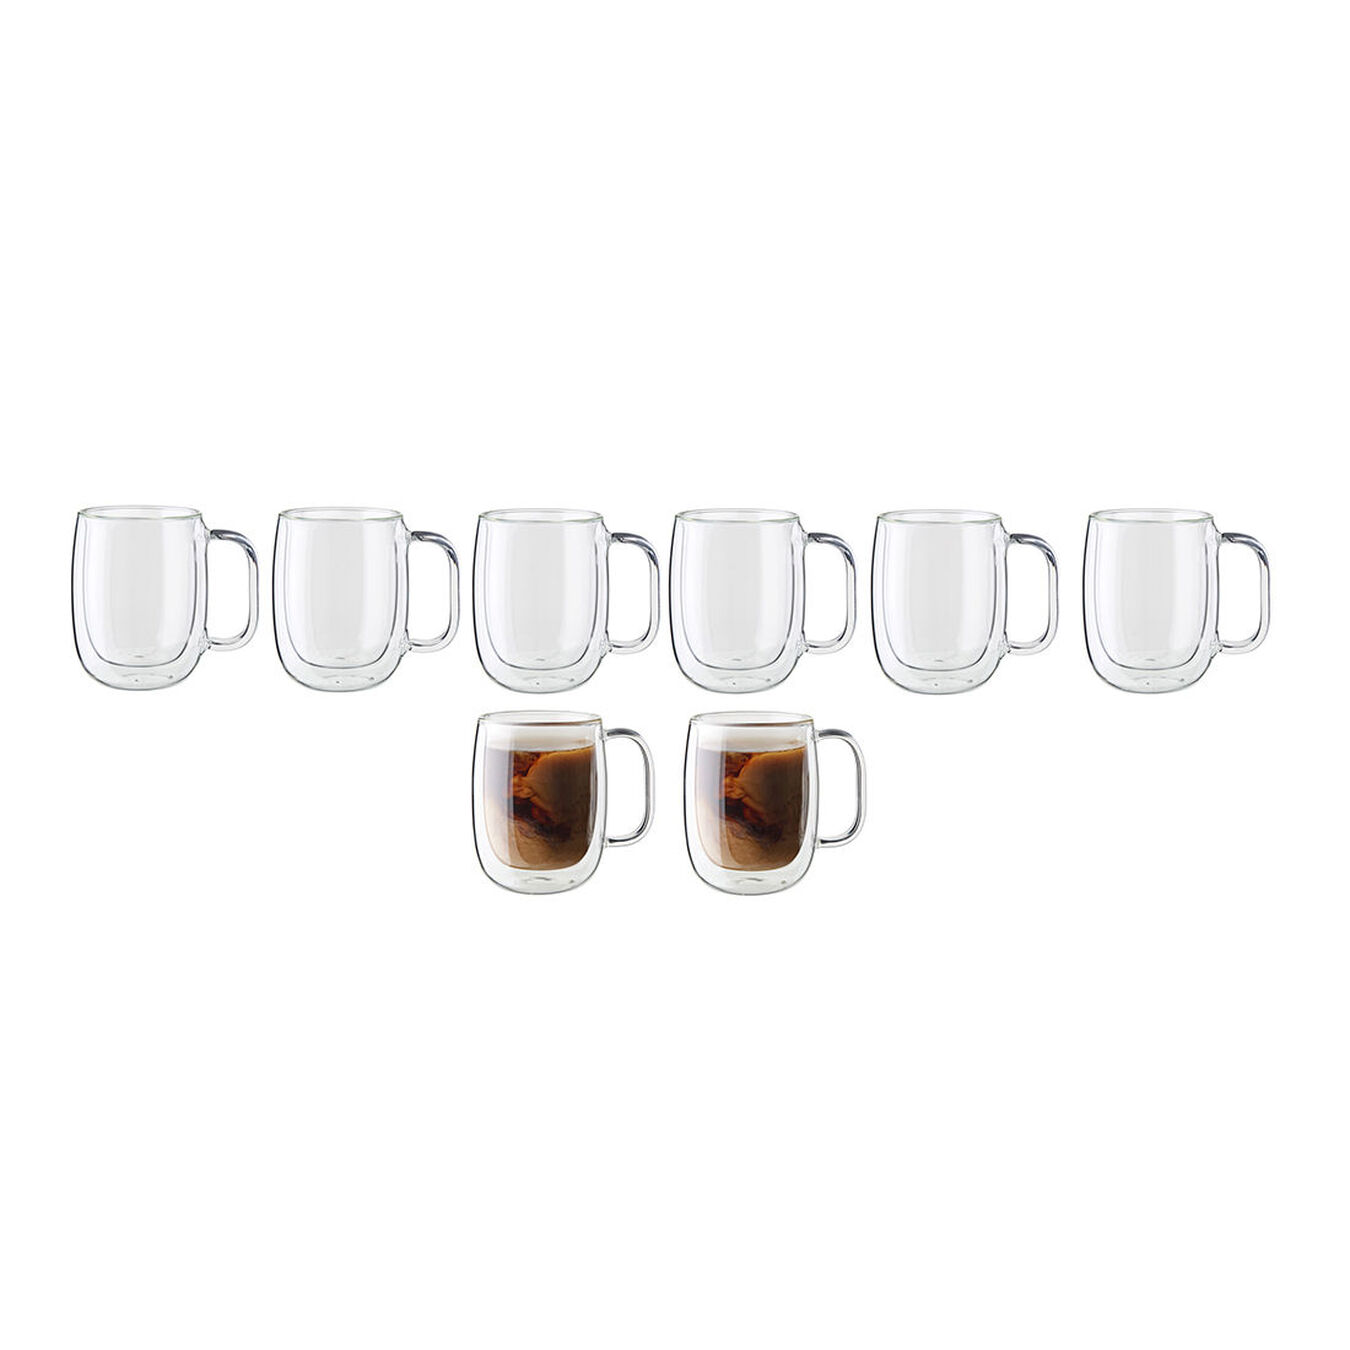 Buy ZWILLING Sorrento Double Wall Glassware Red wine glass set